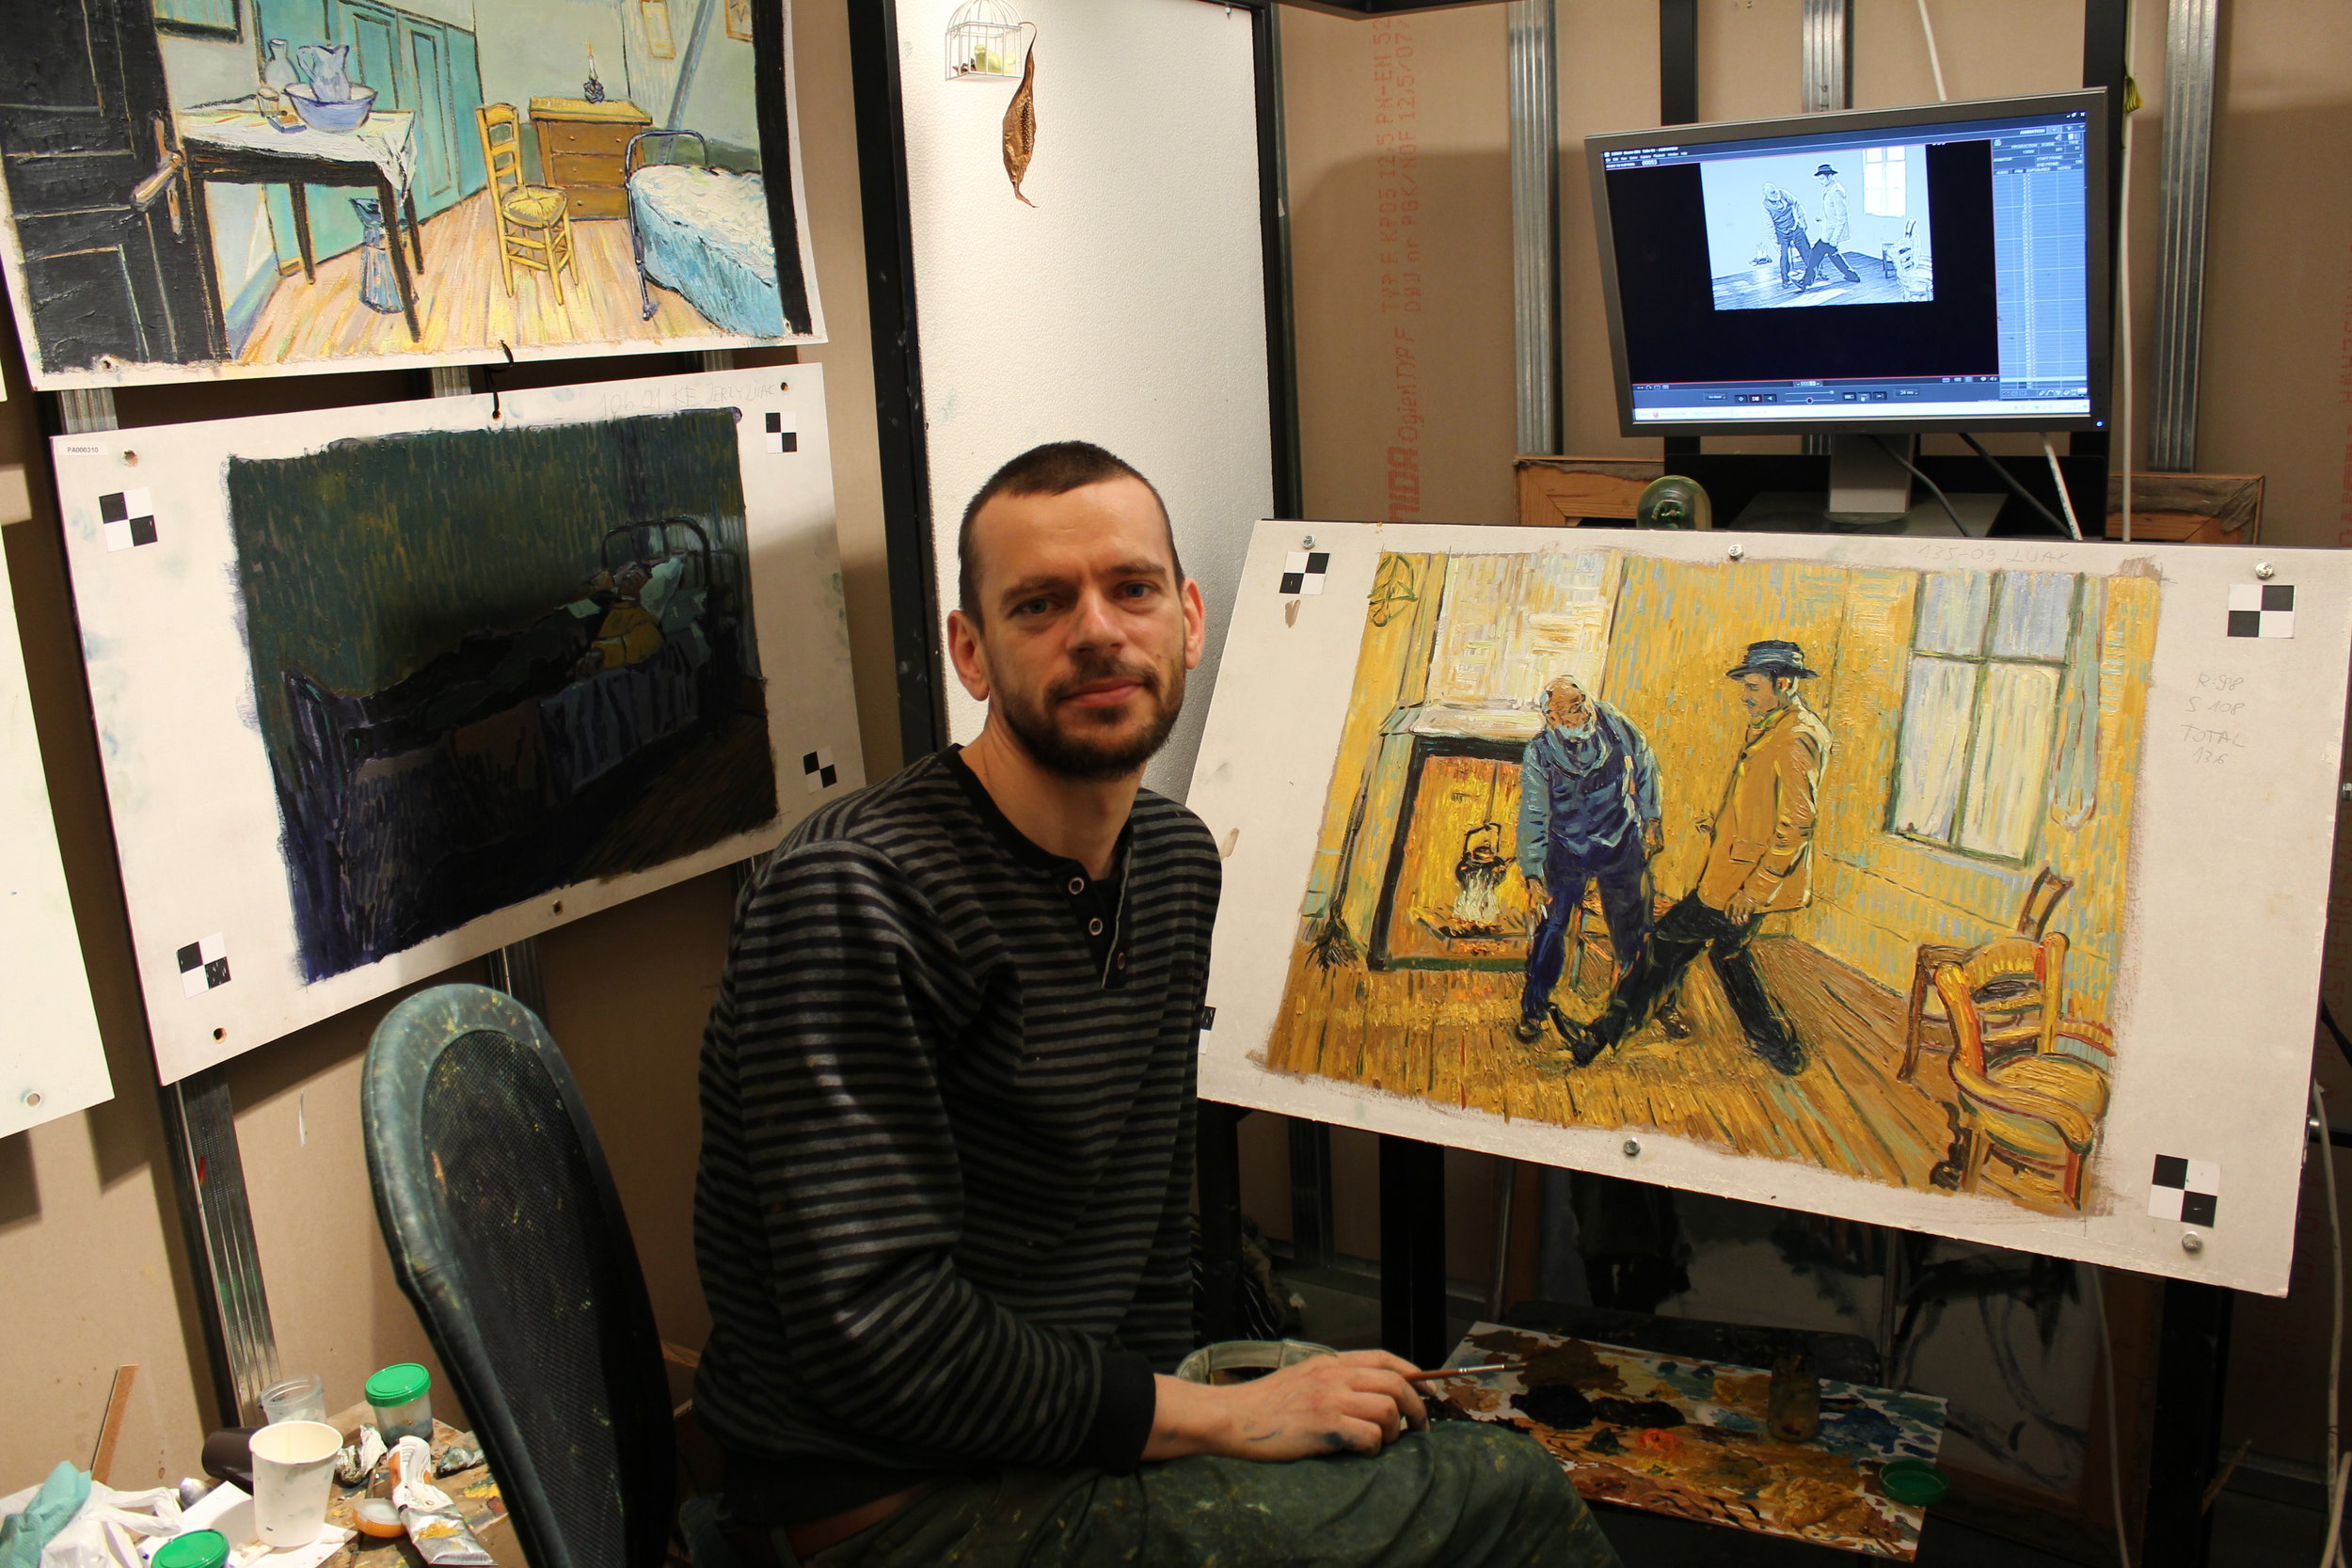  Behind the scenes images of the painting animators behind the award-winning film, " Loving Vincent " - courtesy of BreakThru Films 